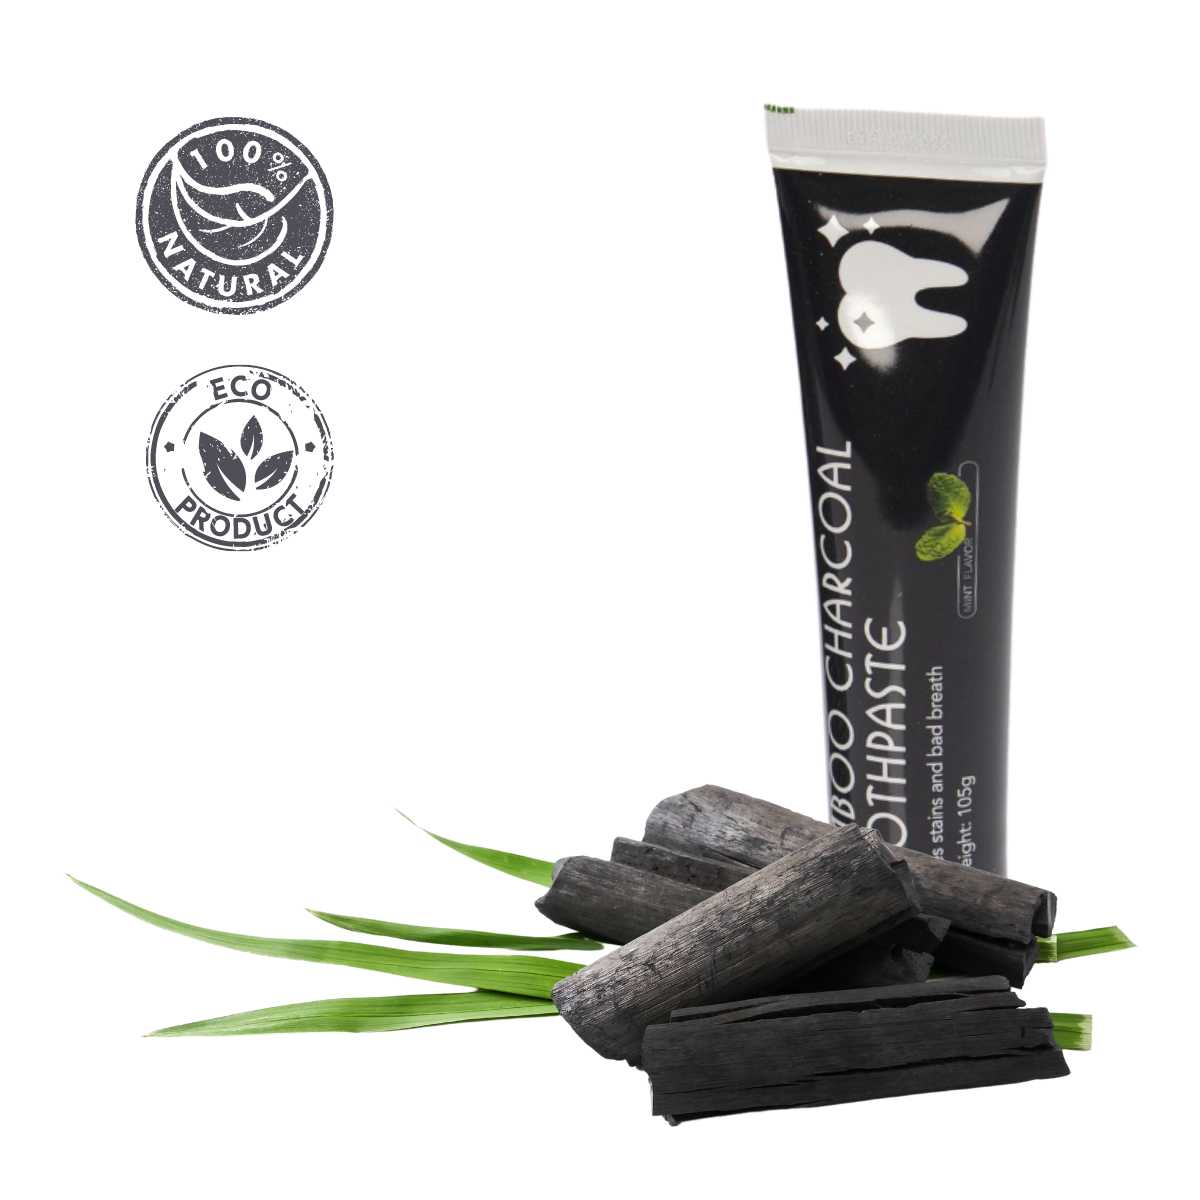 Bamboo Charcoal Toothpaste with 4 Bamboo Charcoal Toothbrushes green-goose